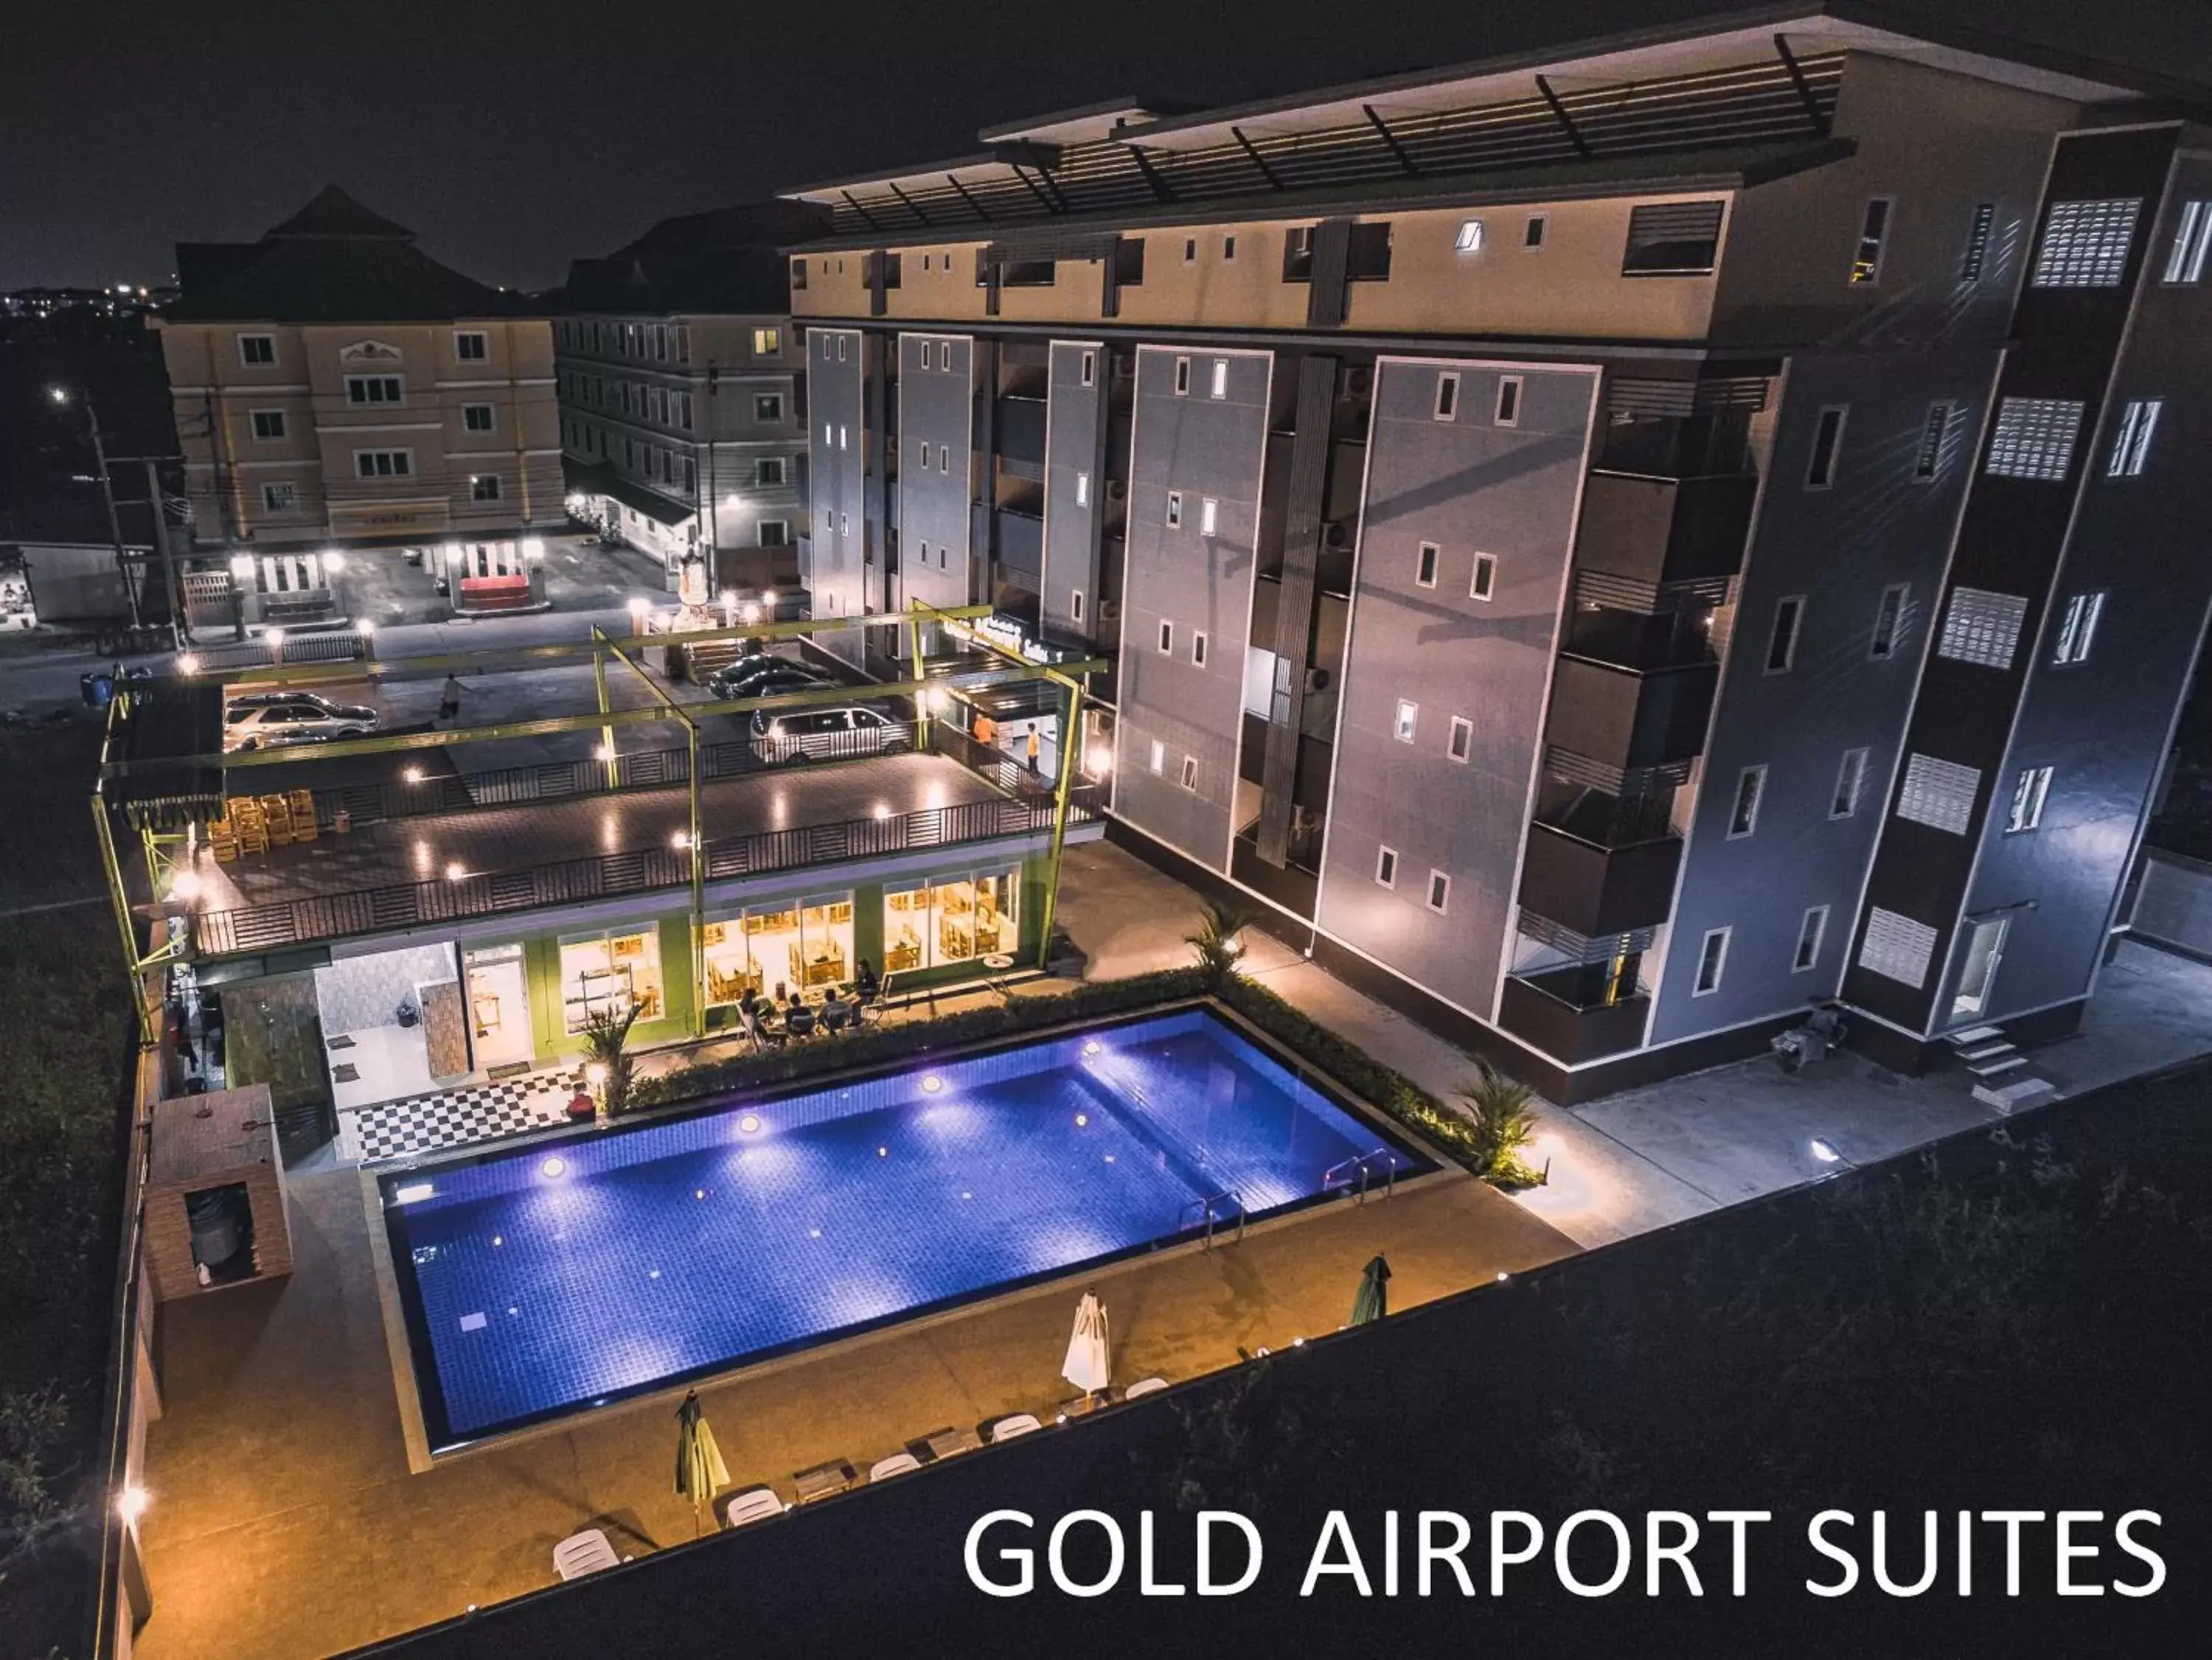 Bird's eye view in Gold Airport Suites